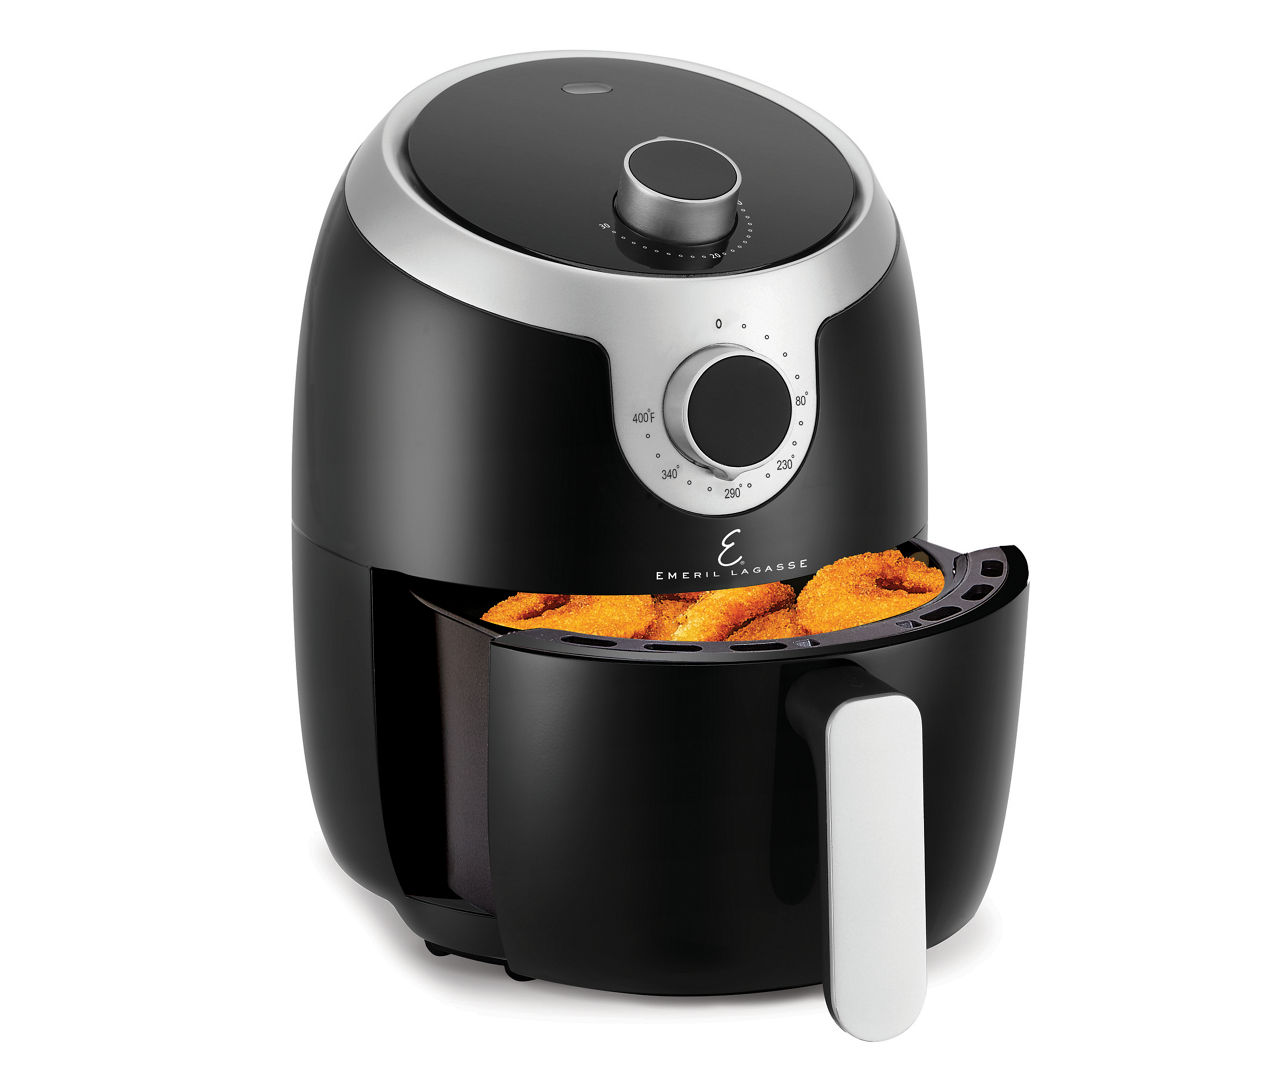 Whip up delicious meals with this refurbished Emeril Lagasse air fryer, on  sale for 44% off